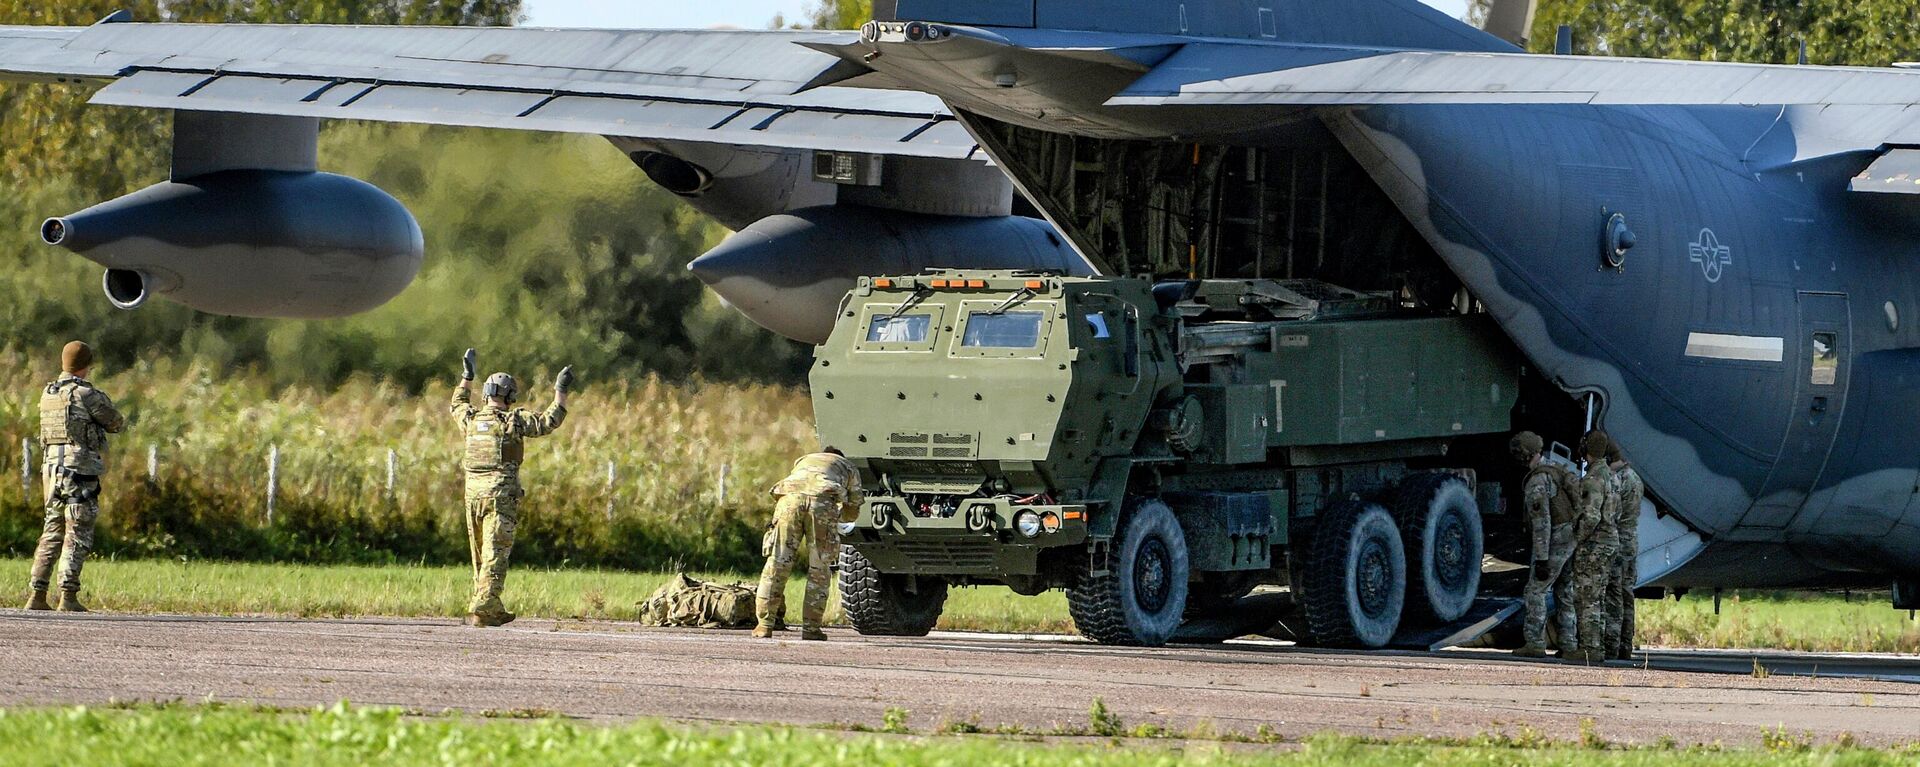 Soldiers load a High-Mobility Artillery Rocket System (HIMARS ) from a US Special Operations MC-130J aircraft during military exercises at Spilve Airport in Riga, Latvia, on Sept. 26, 2022. - Sputnik International, 1920, 28.02.2023